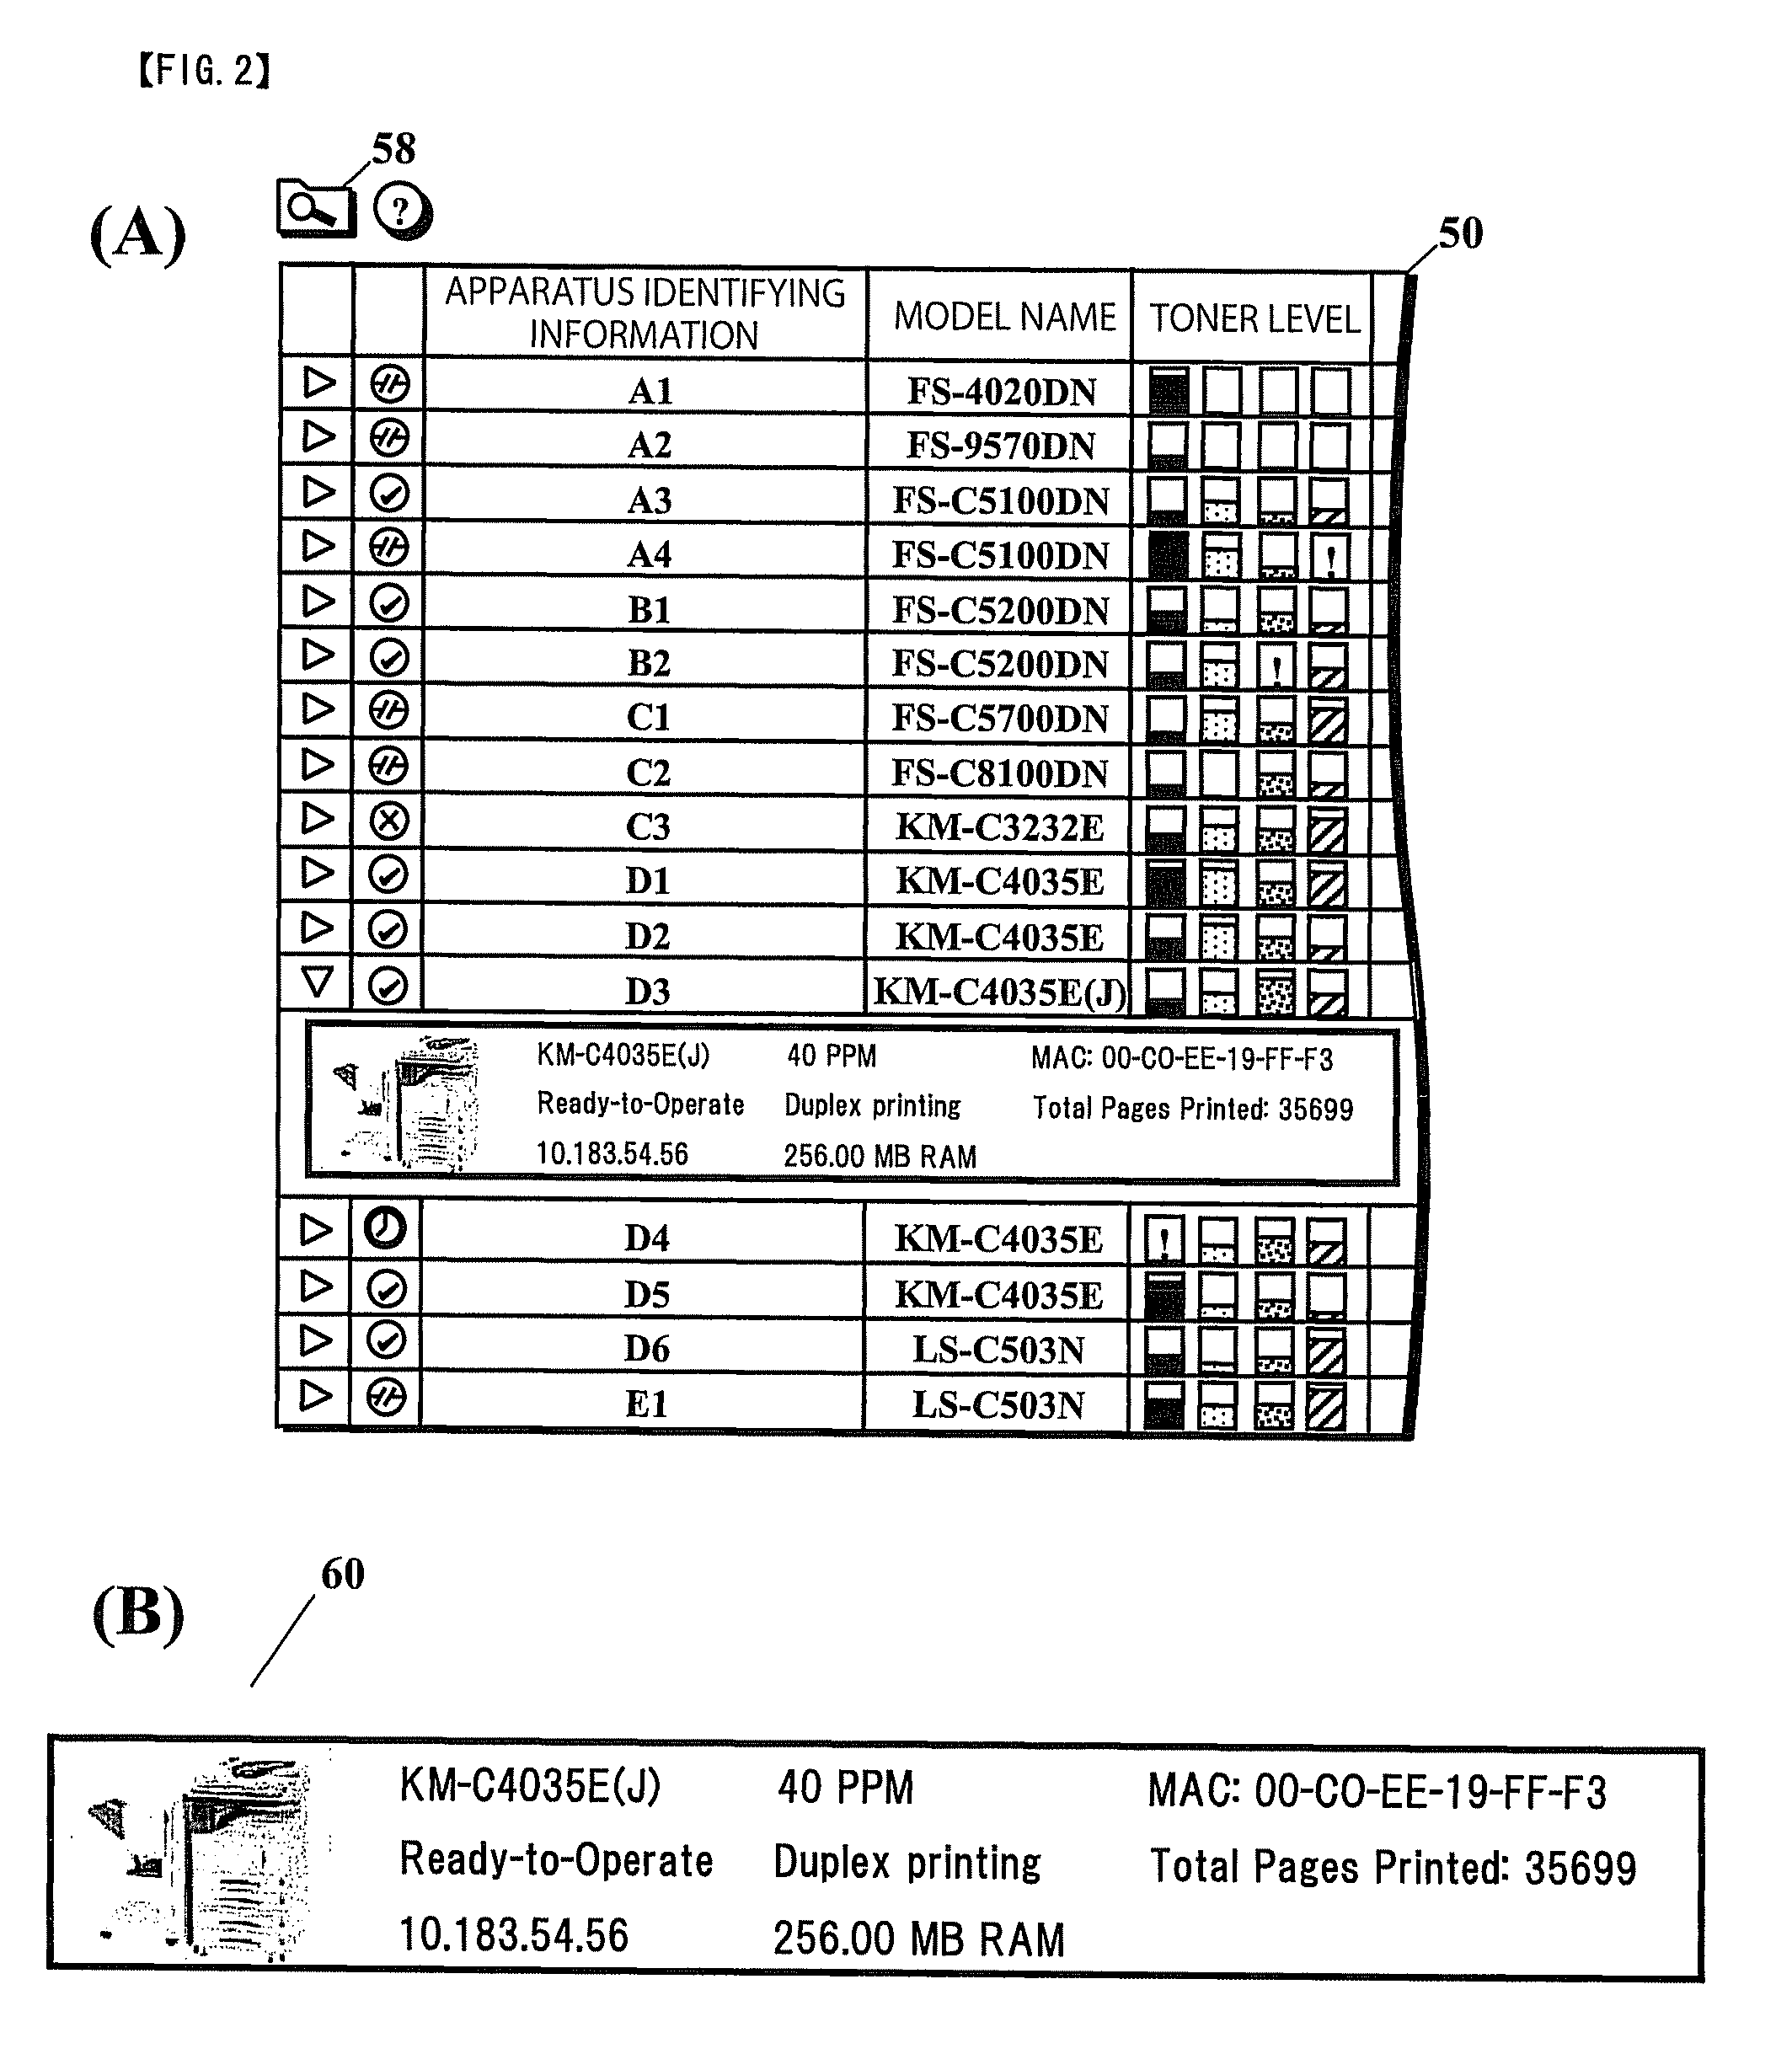 Displaying status icons of remaining consumables for plural image forming apparatuses